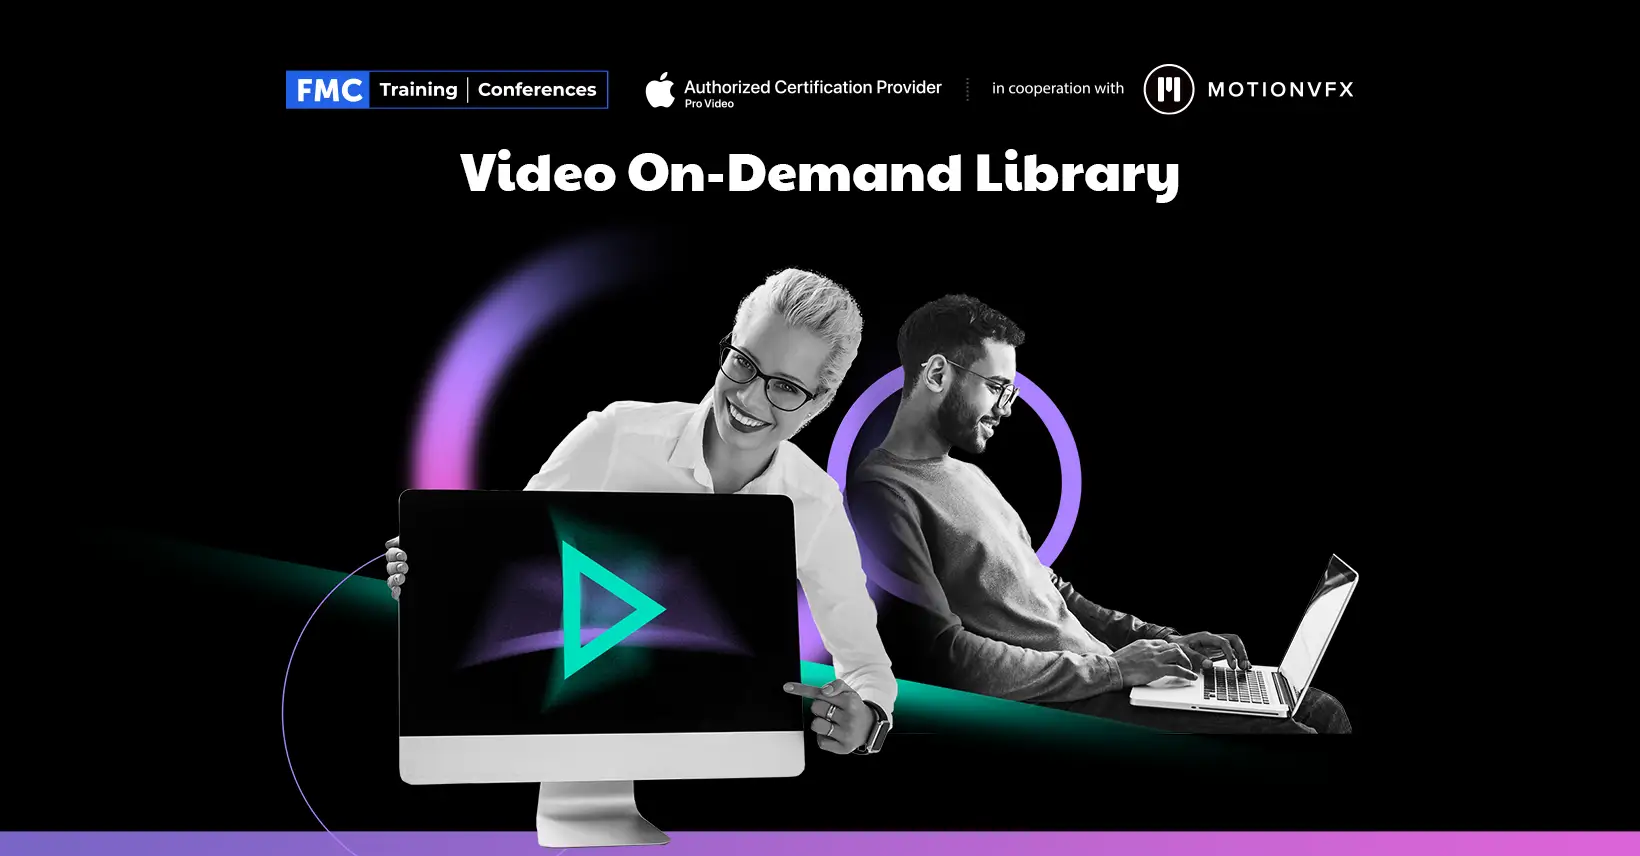 Protected Video On-Demand Library - FMC Training Network